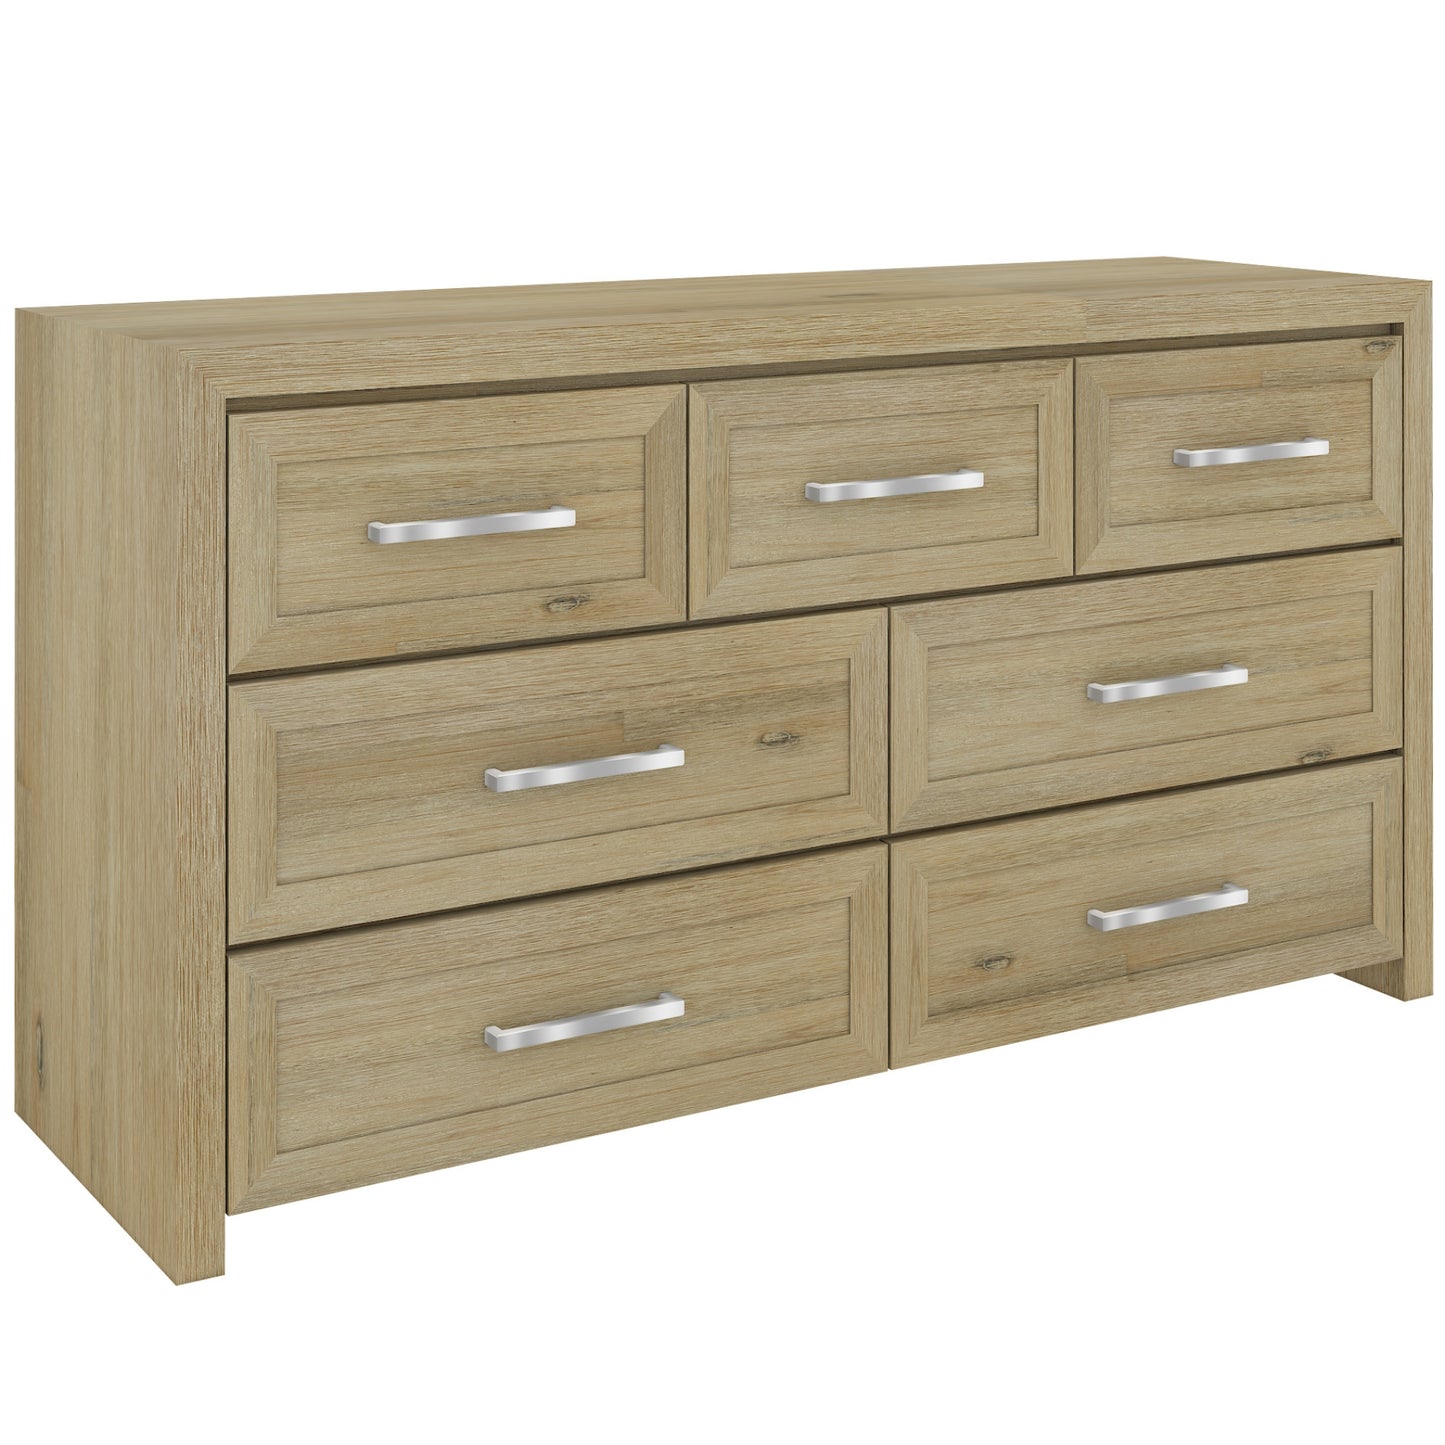 Gracelyn Solid Wood 7 Chest of Drawers - Smoke